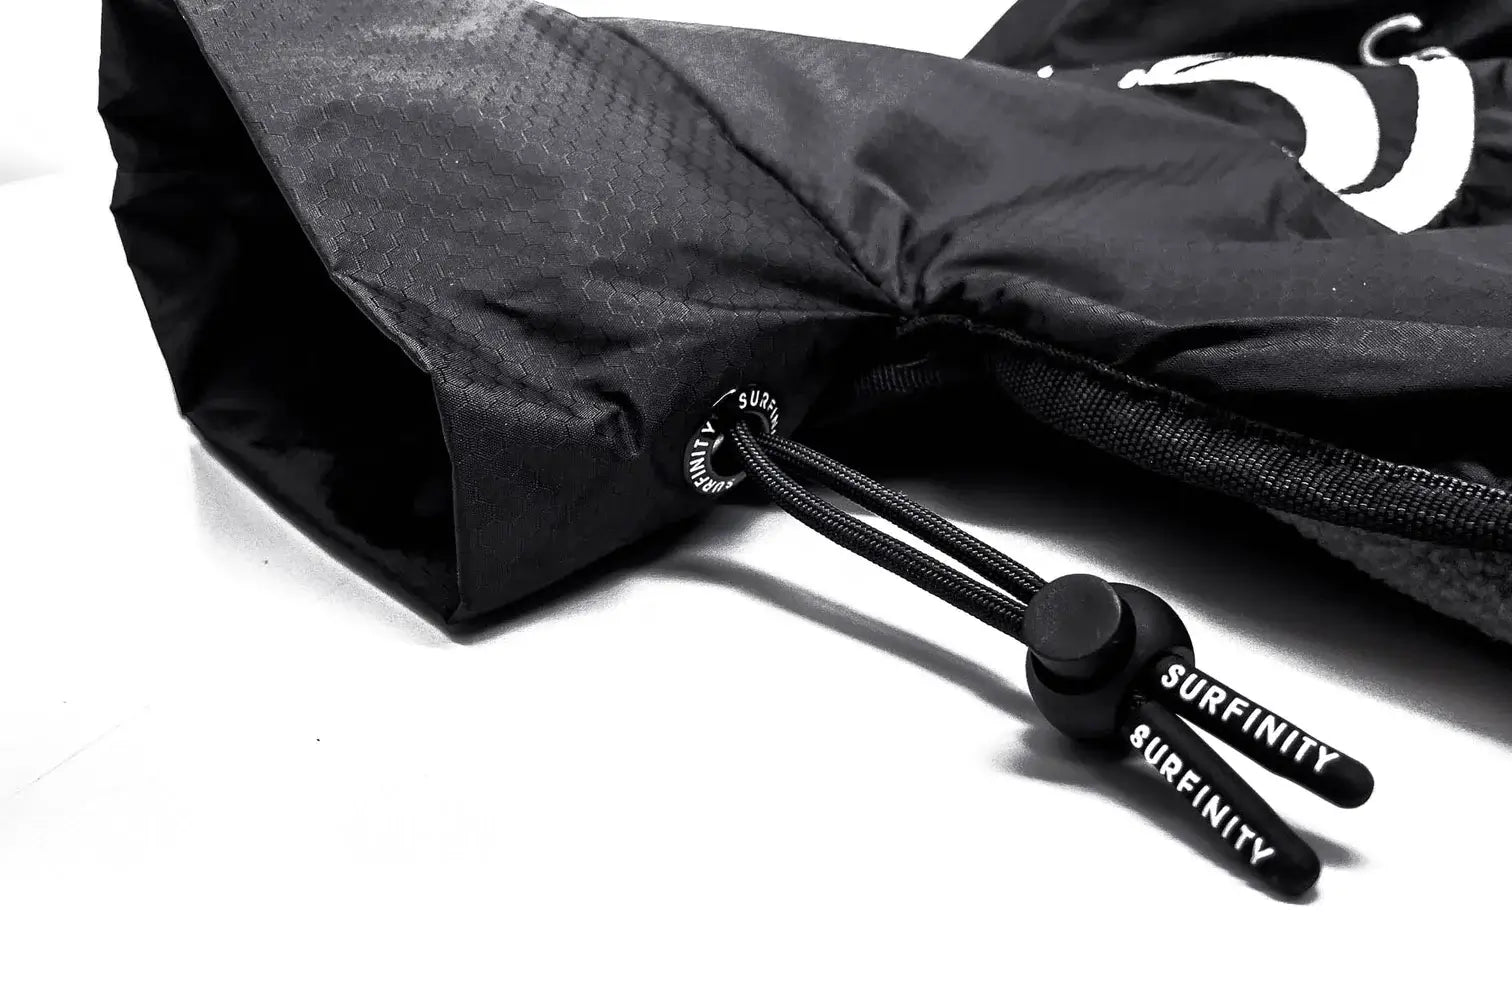 A black Malibu drawstring bag with the Malibu logo on it, suitable for boating hours.